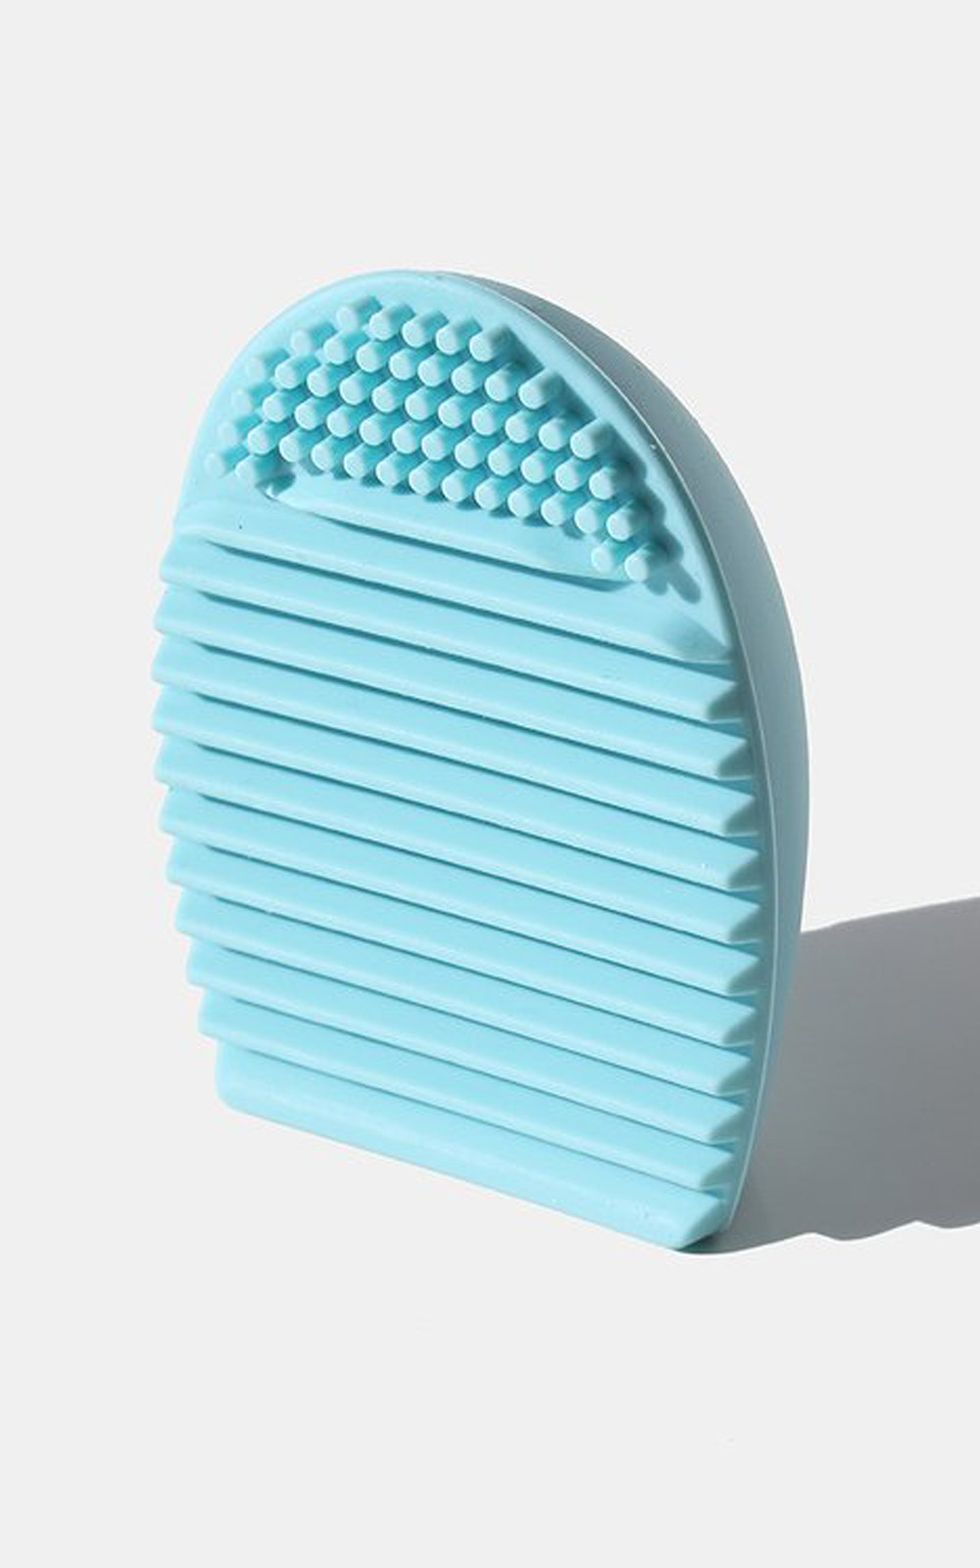 The $1 AOA Brush Cleaning Egg Will Make You Want to Wash Your Makeup Brushes